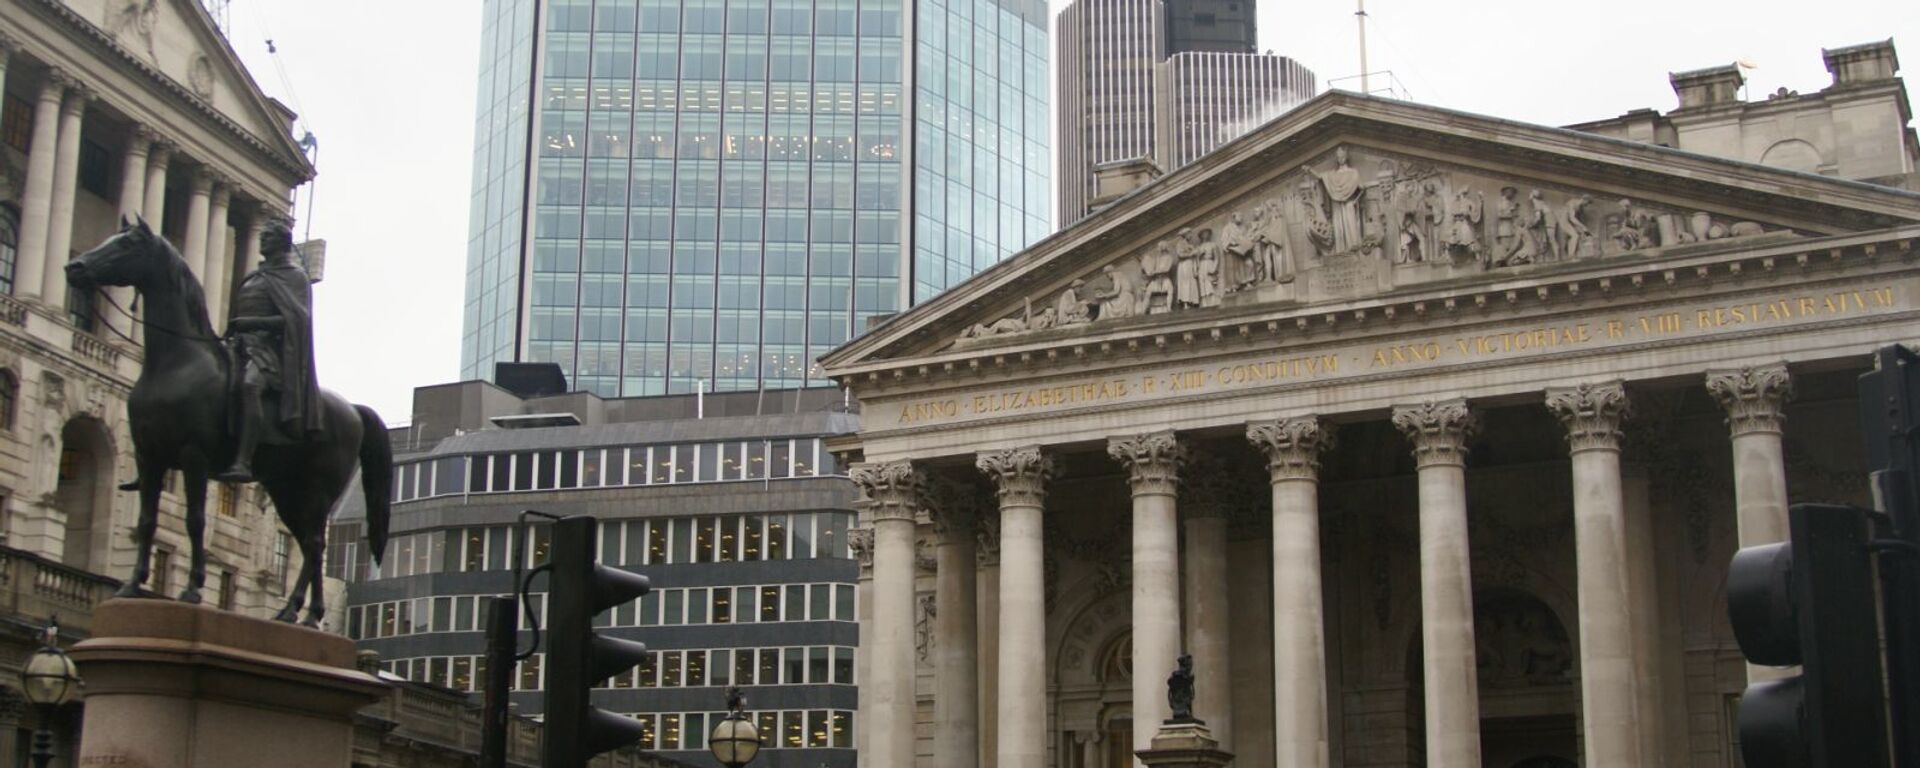 London Stock Exchange Tower and the Bank of England to the left - Sputnik International, 1920, 03.11.2022